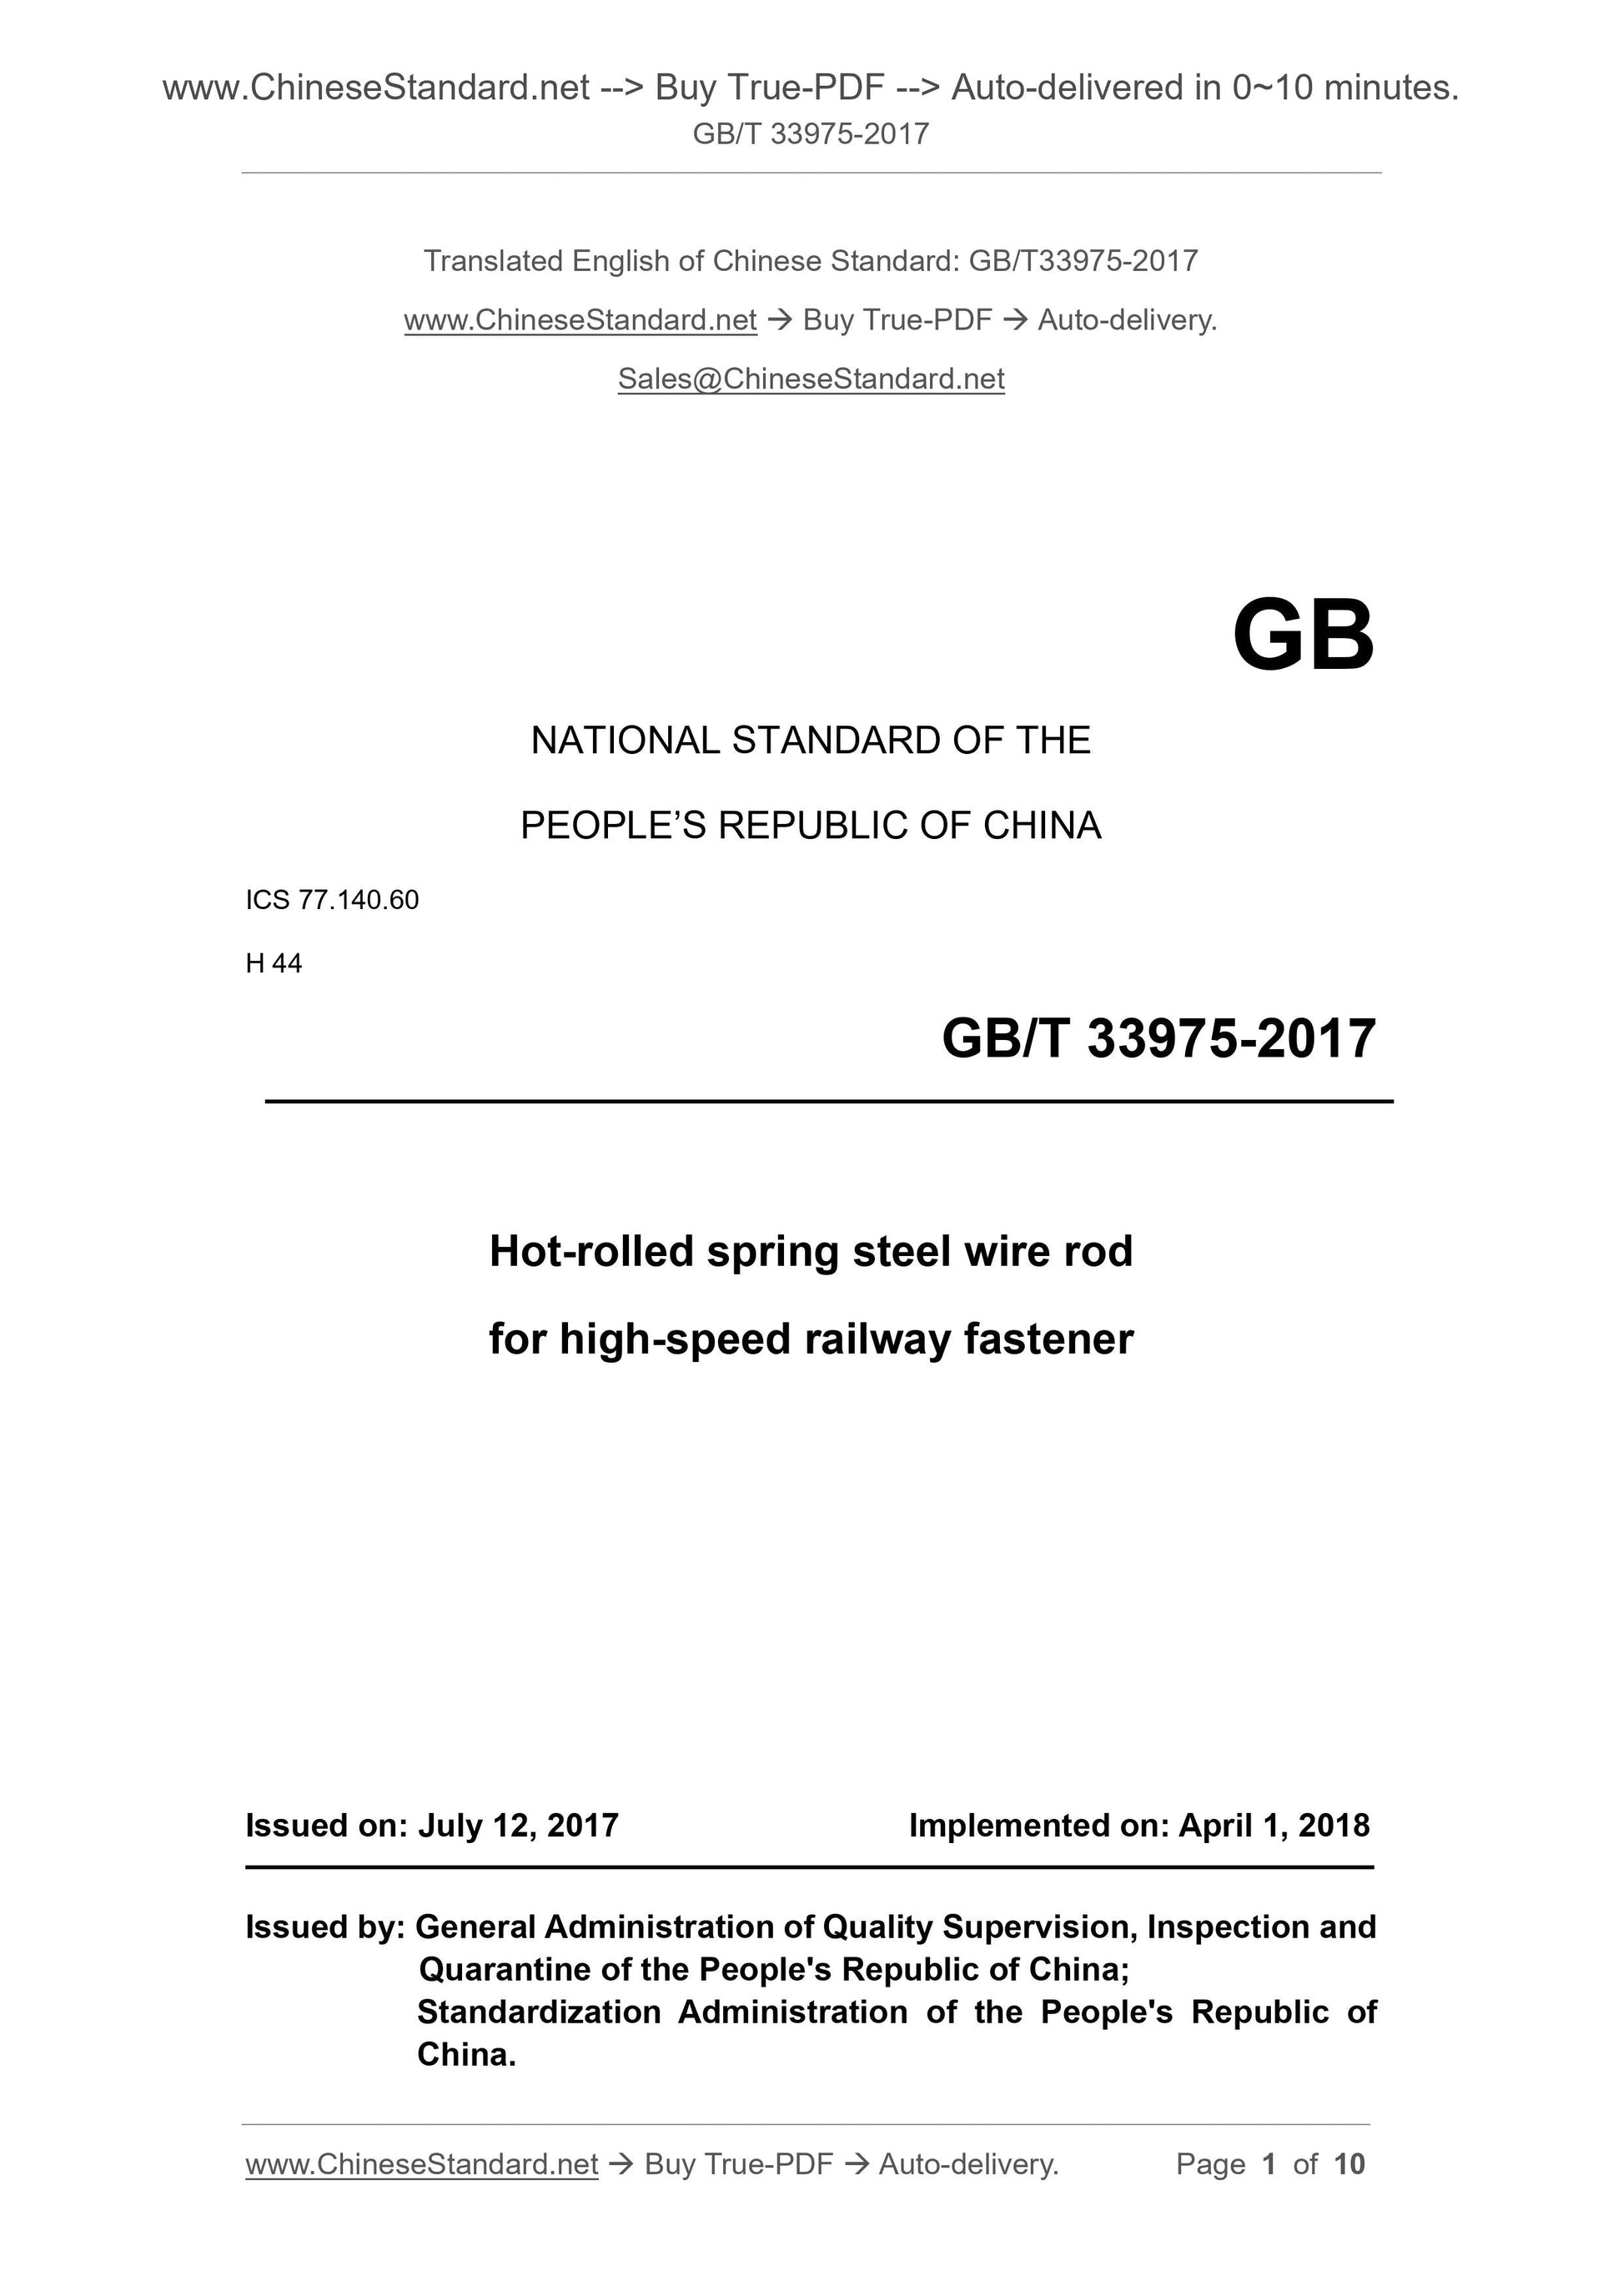 GB/T 33975-2017 Page 1